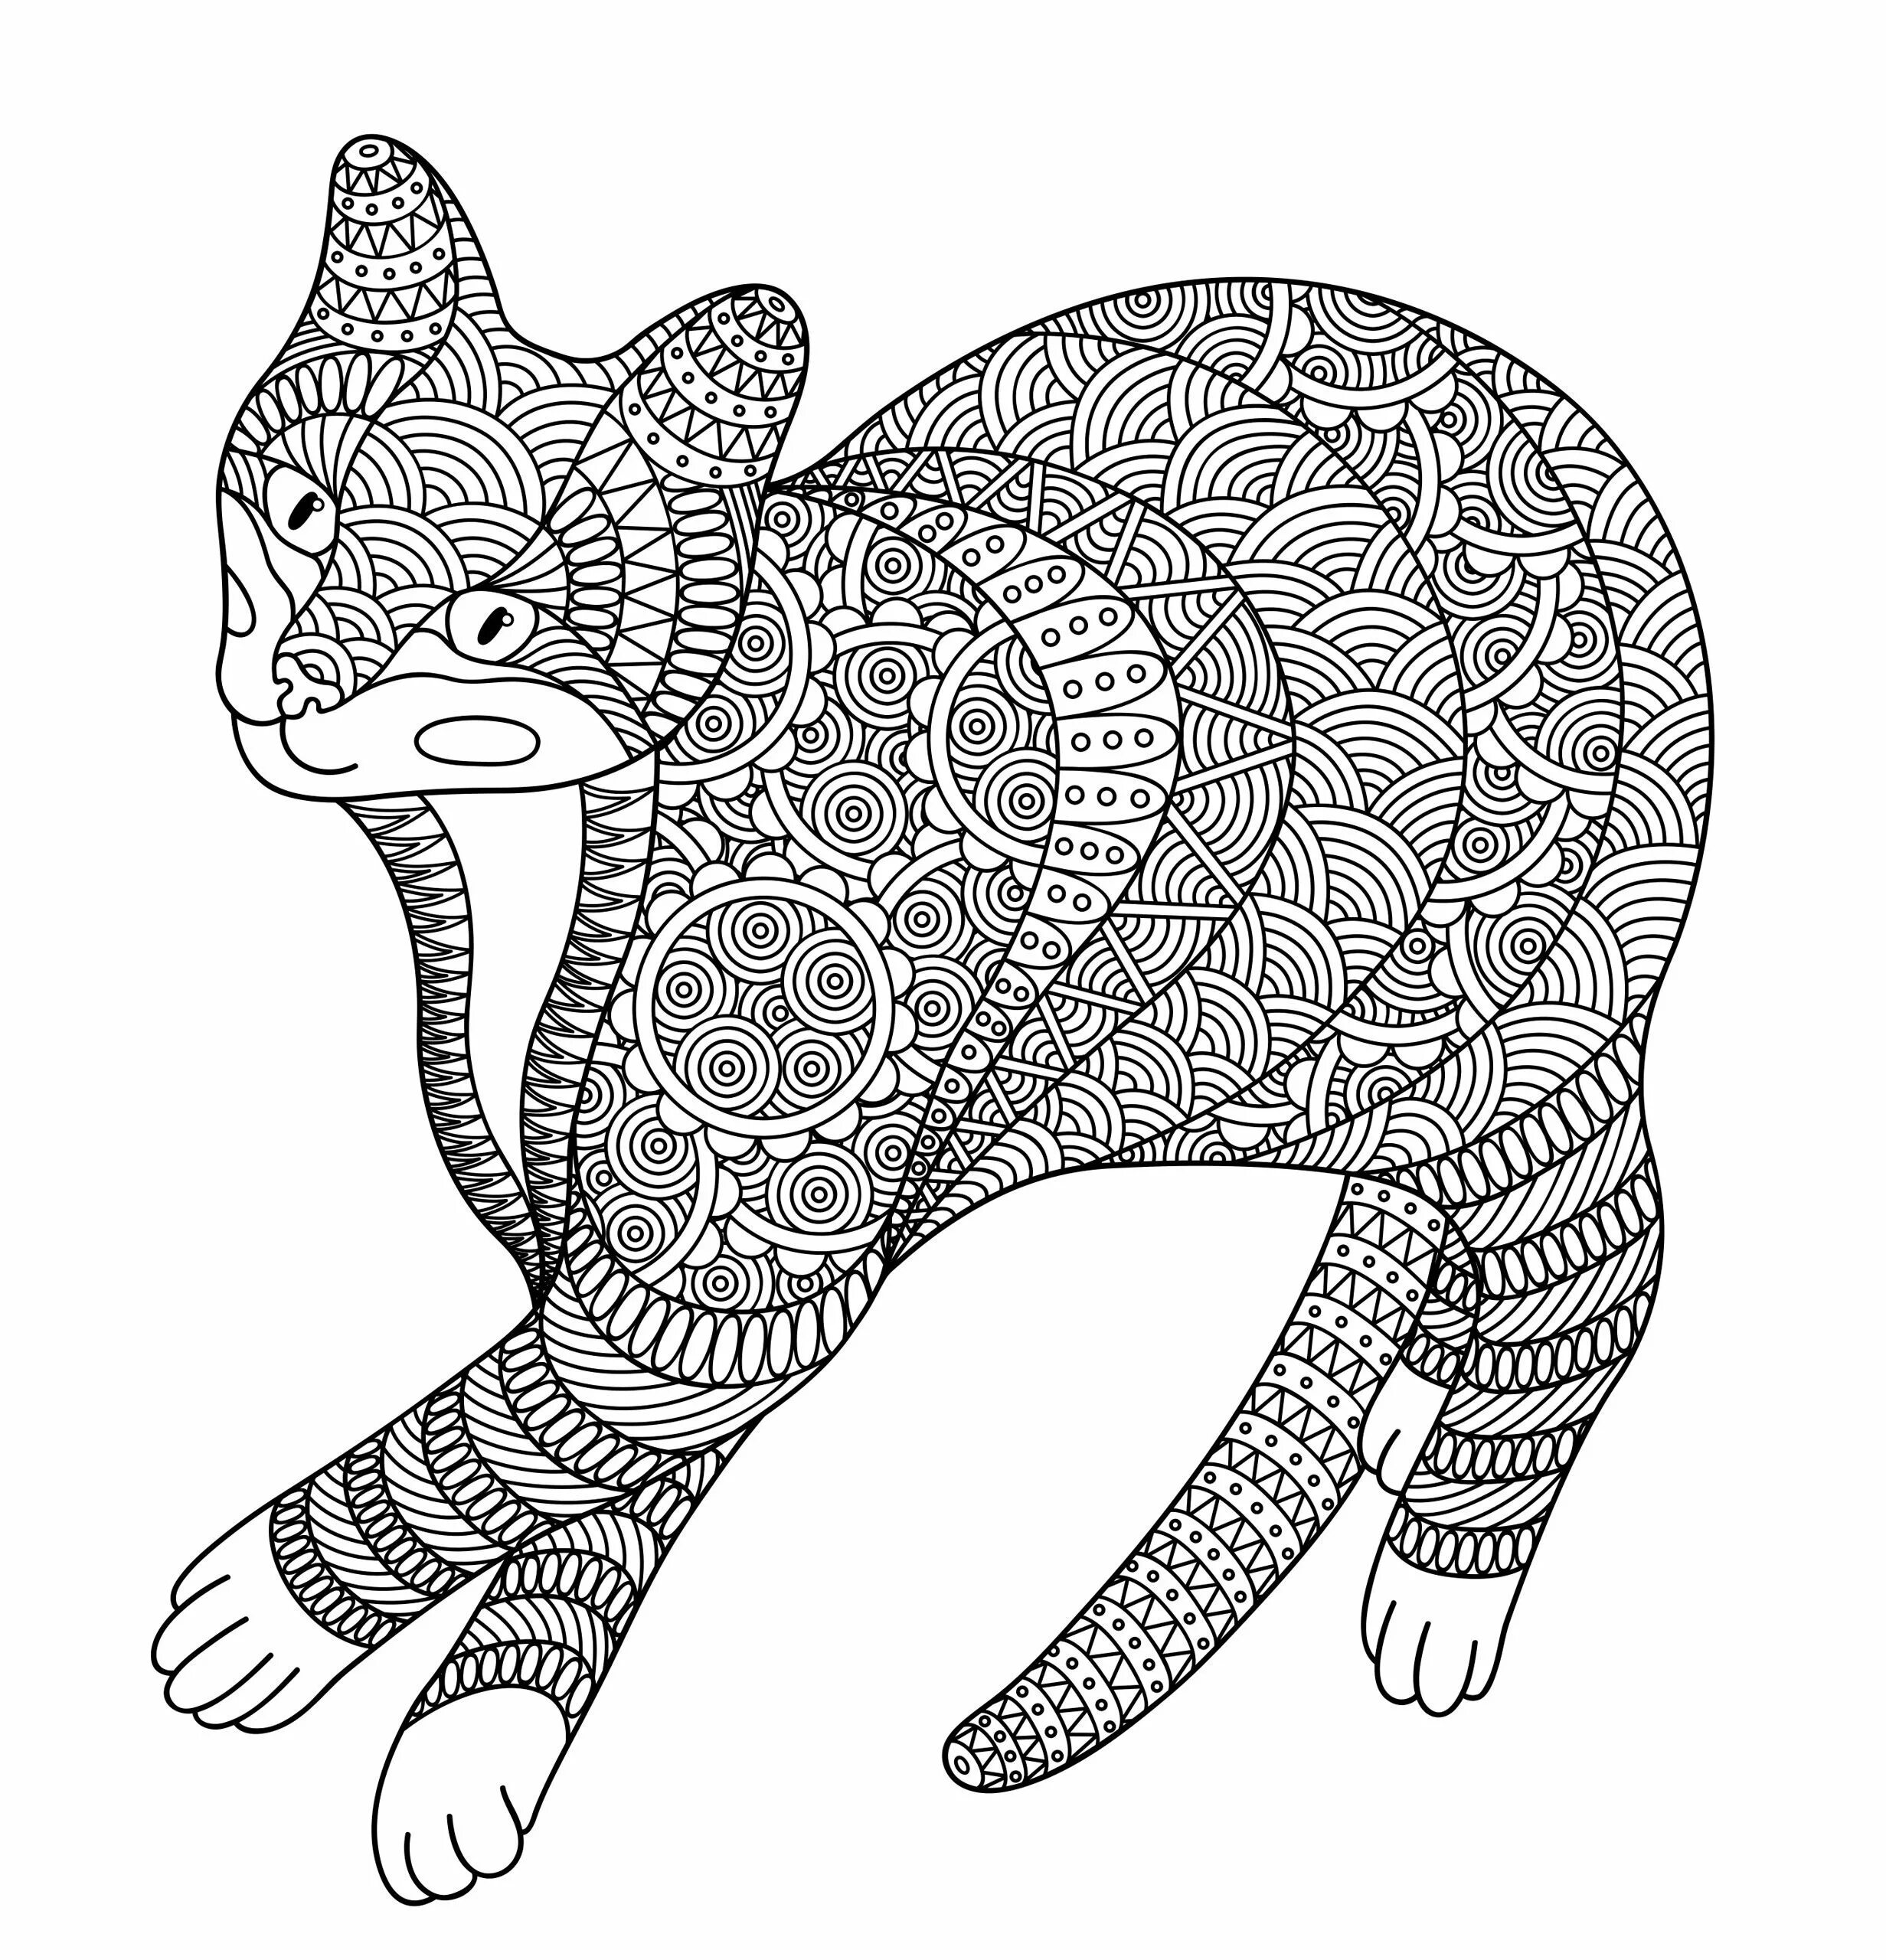 Intriguing animal coloring page